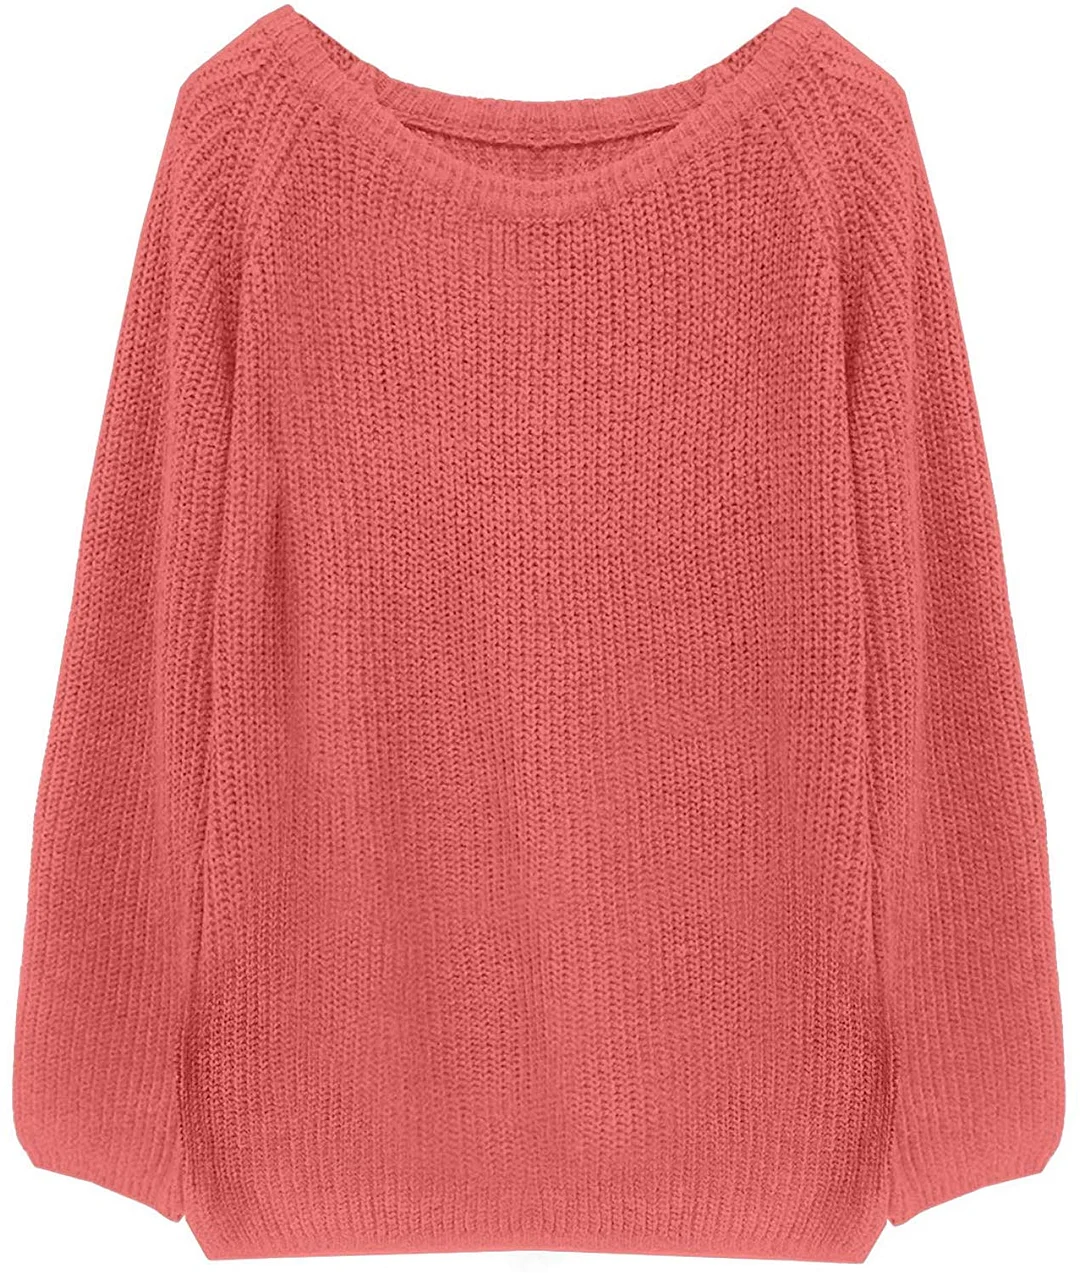 Women's Crew Neck Solid Long Drop Sleeves Loose Knit Pullover Sweaters